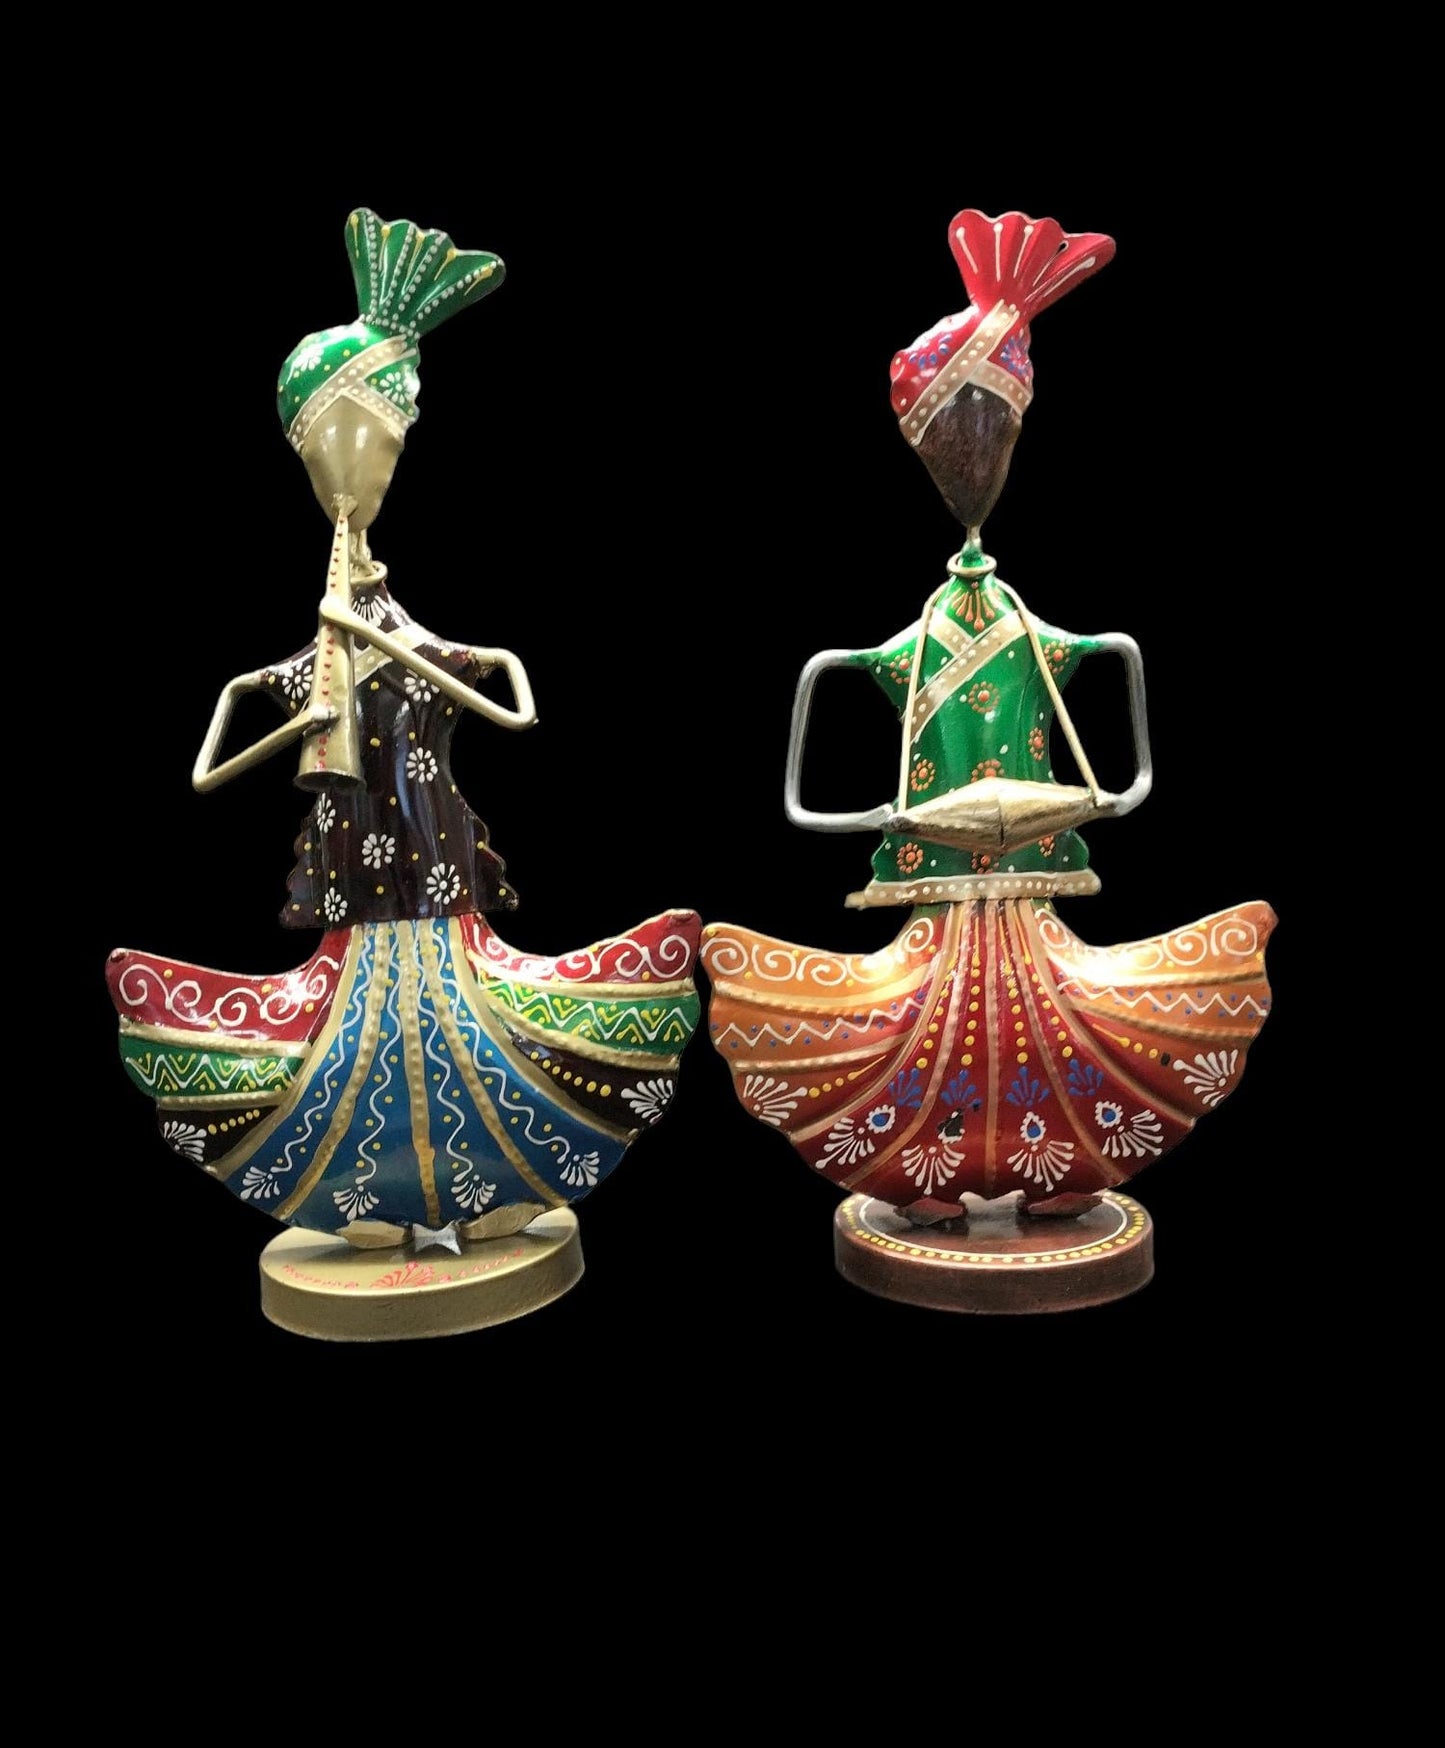 Tribal Man Playing Musical Instrument Decorative Showpiece set of 2